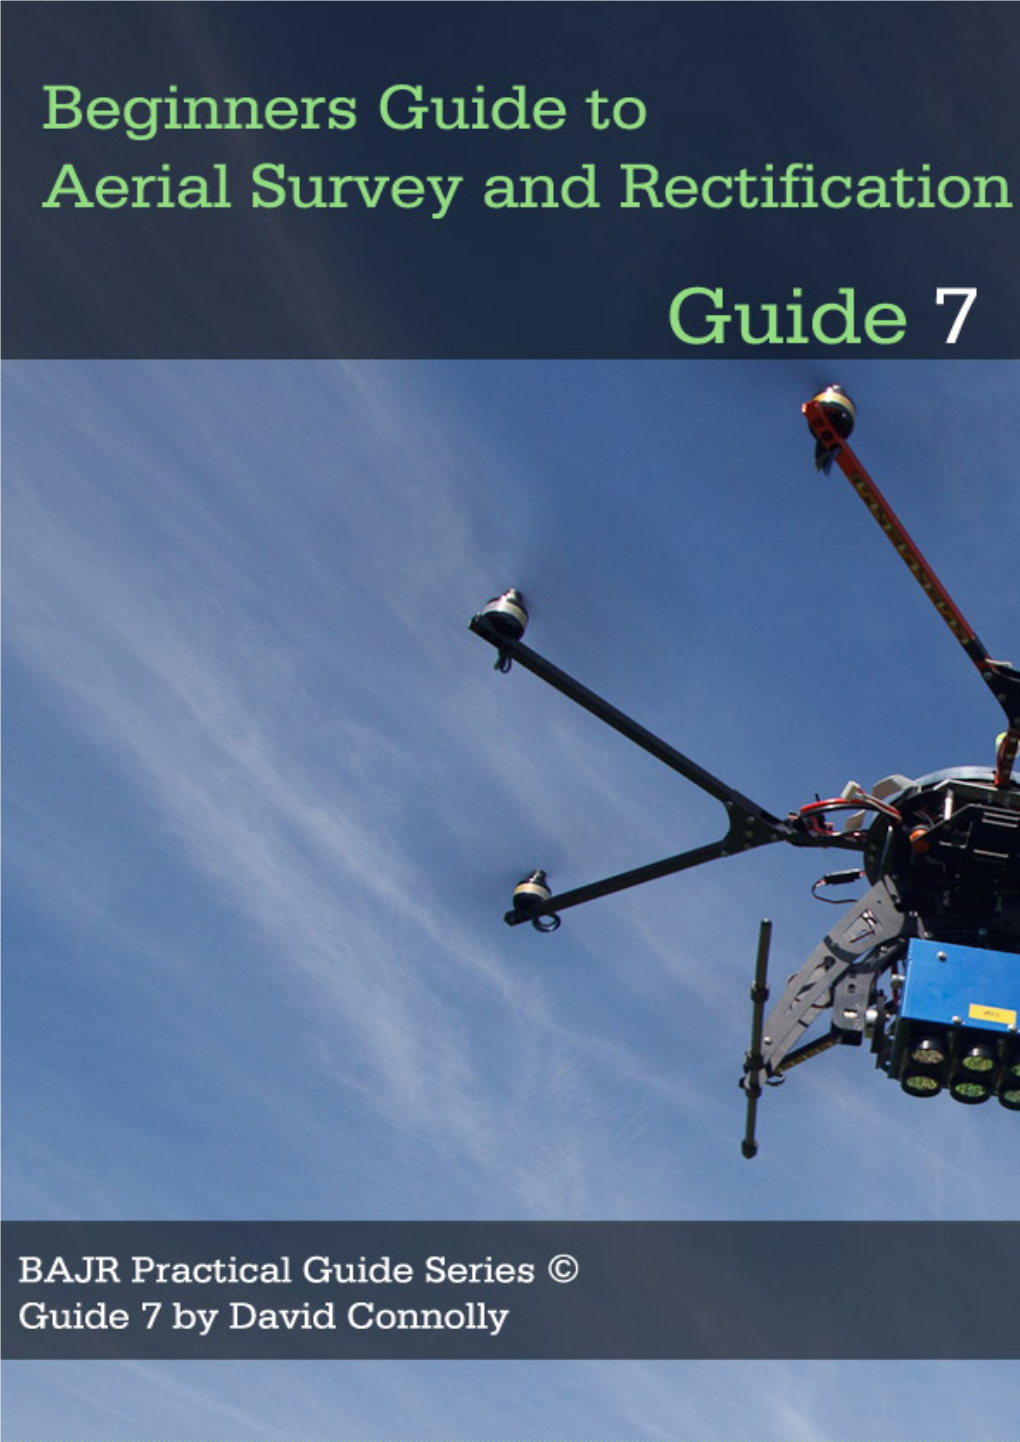 What Is Aerial Survey?